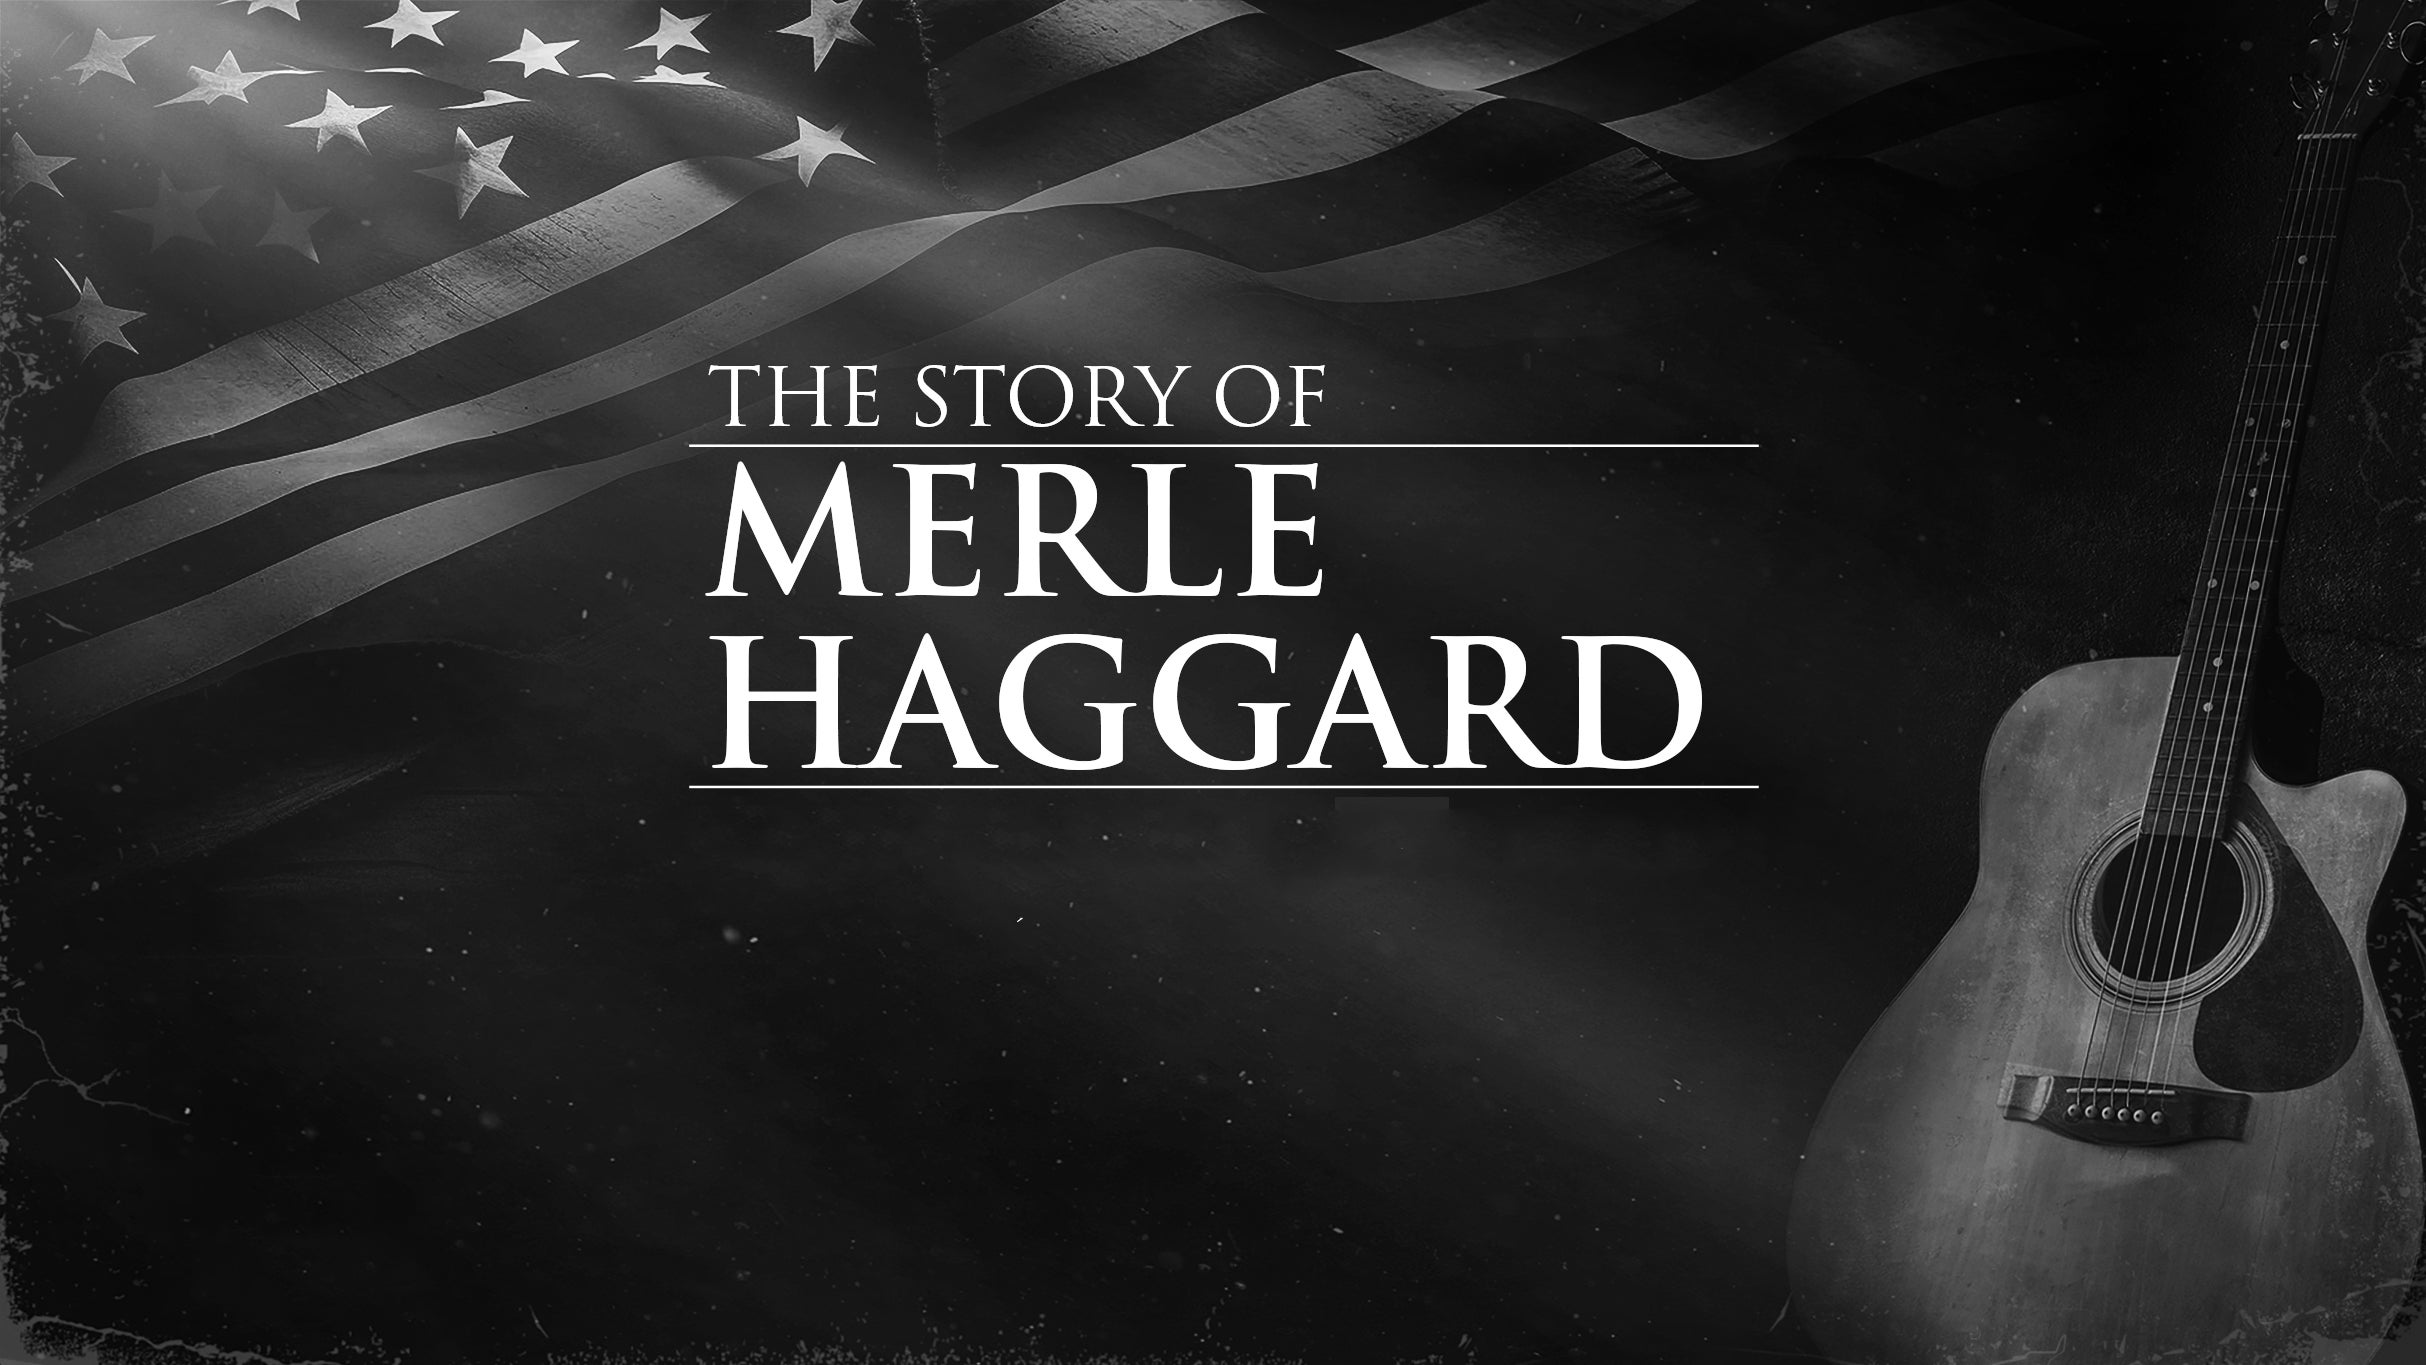 The Story of Merle Haggard in Edmonton promo photo for Exclusive presale offer code